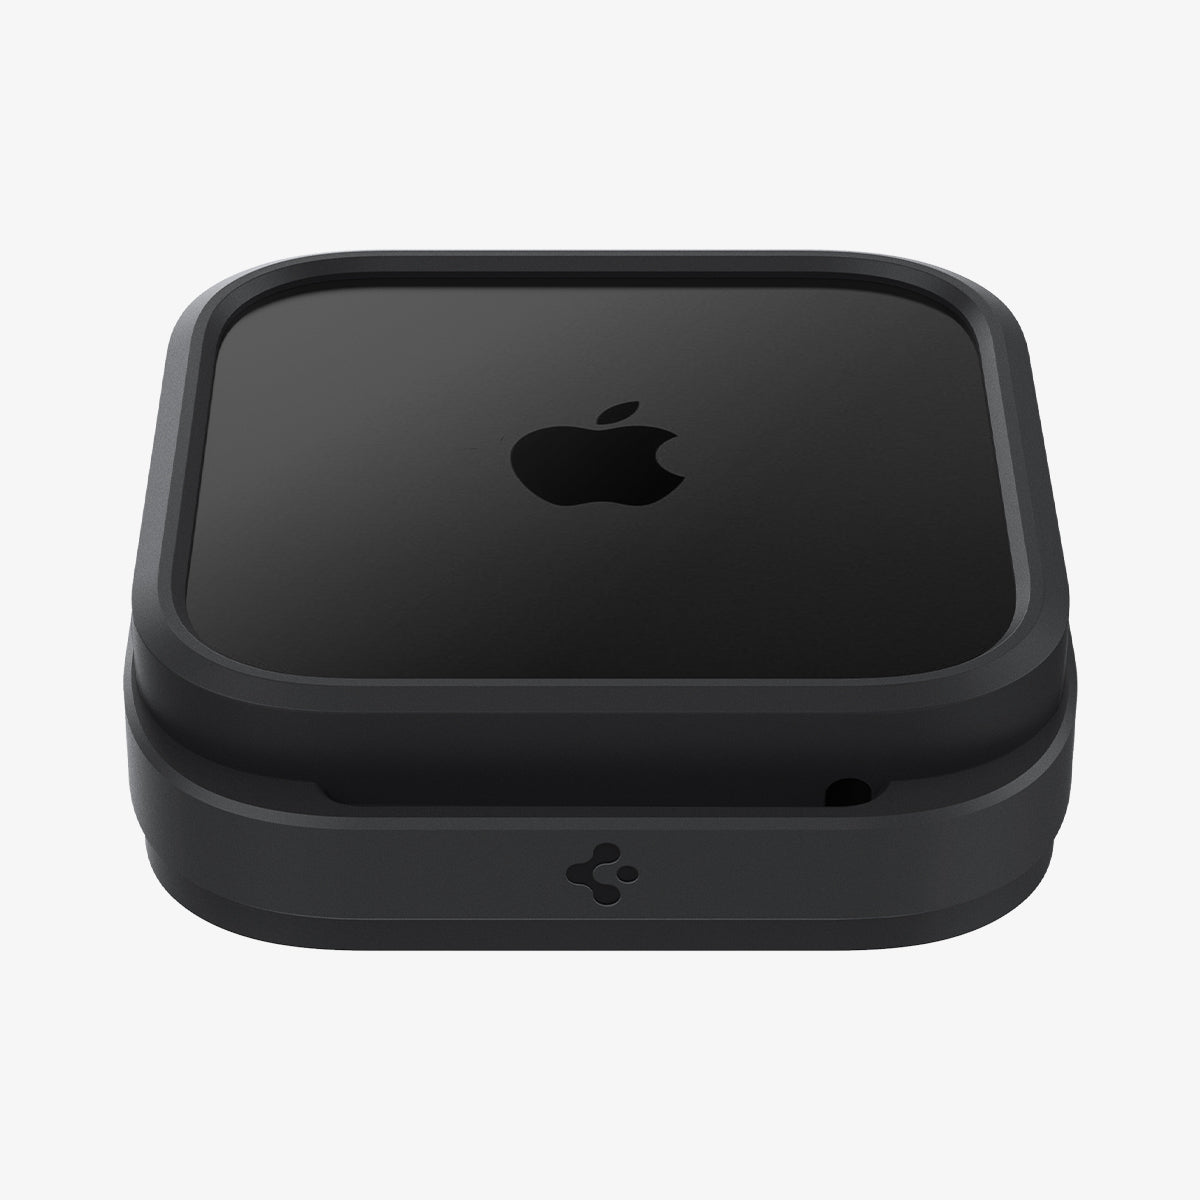 AMP05858 - Apple TV 4K (3rd Gen) Mount Silicone Fit in black showing the top and front